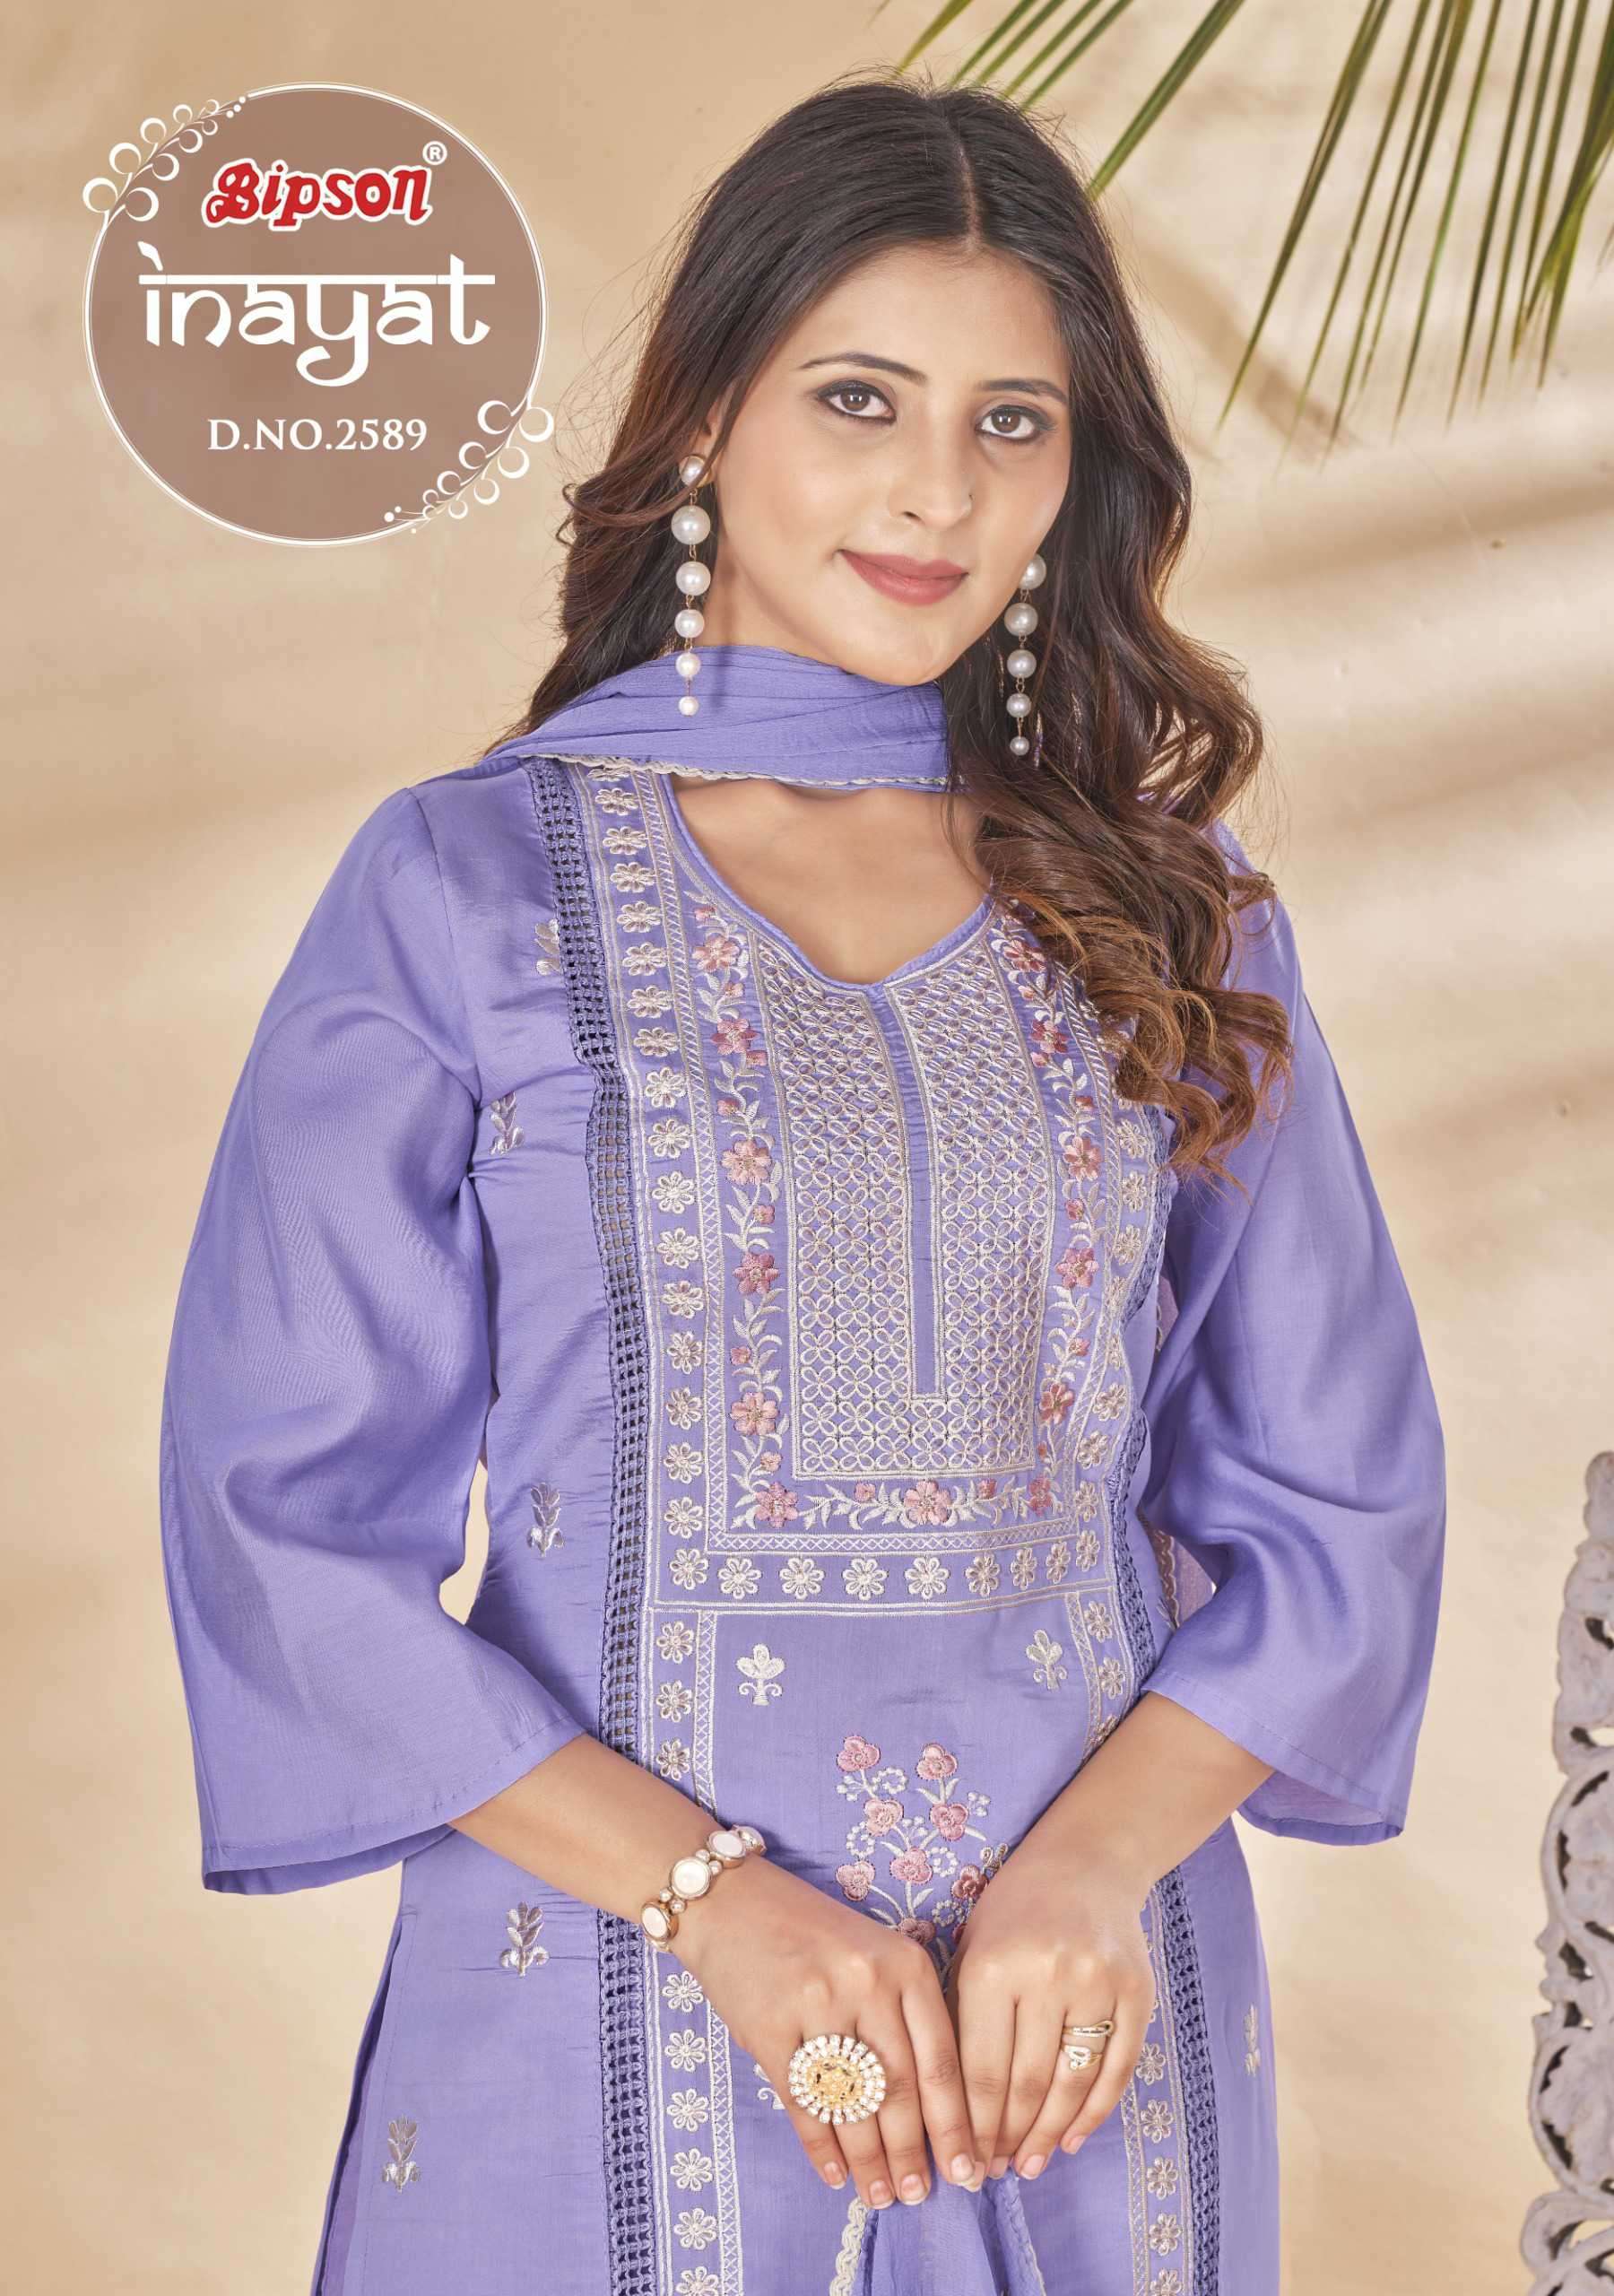 Bipson Inayat 2589 Suit collection